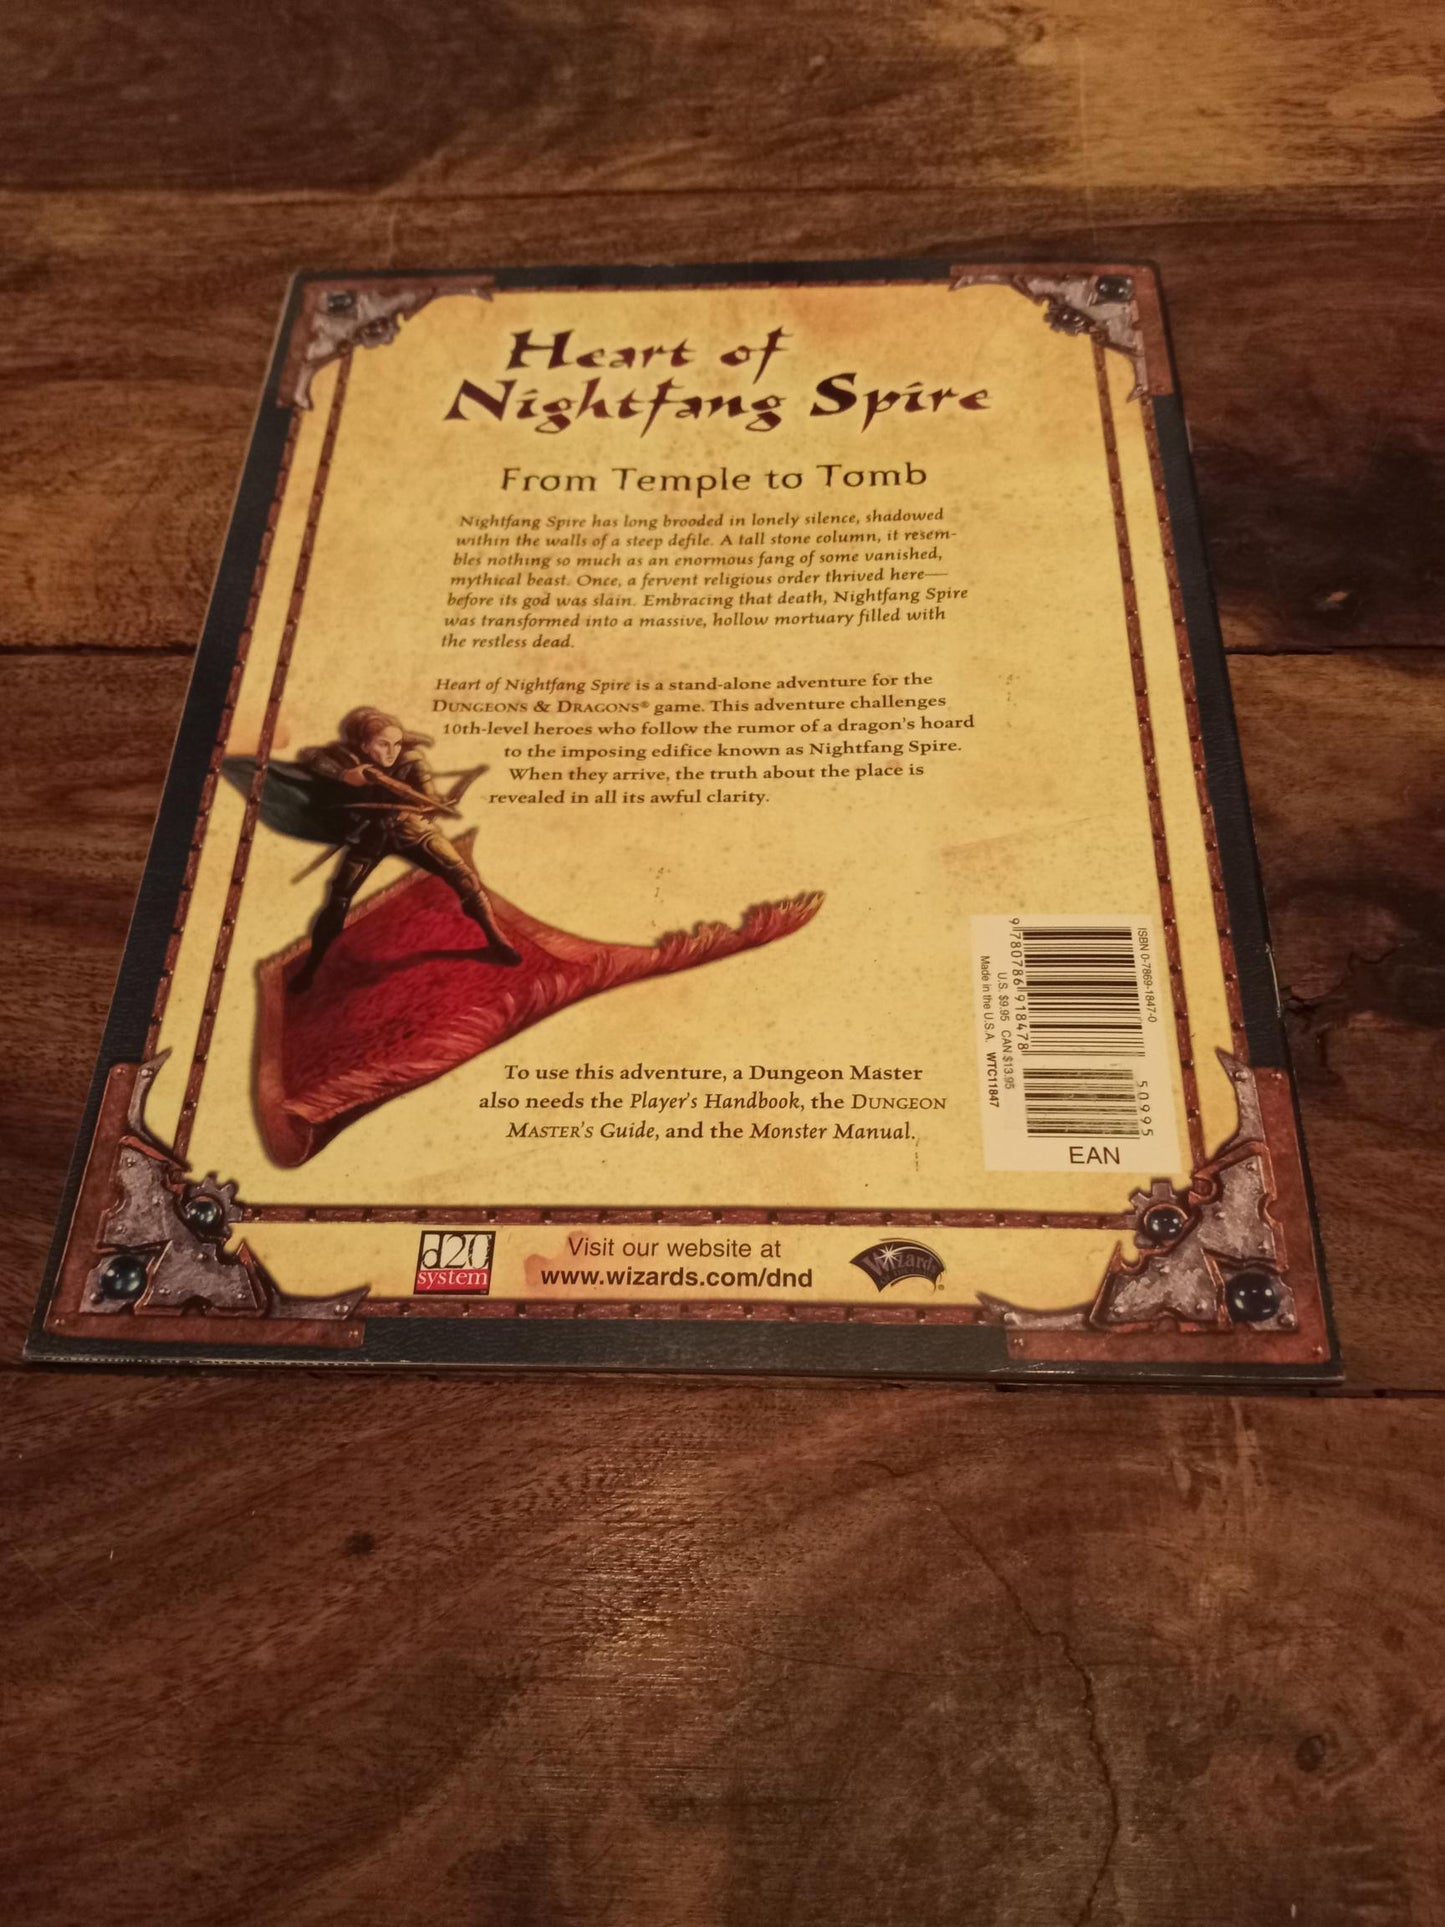 Dungeons & Dragons Heart of Nightfang Spire Wizards of the Coast 2001